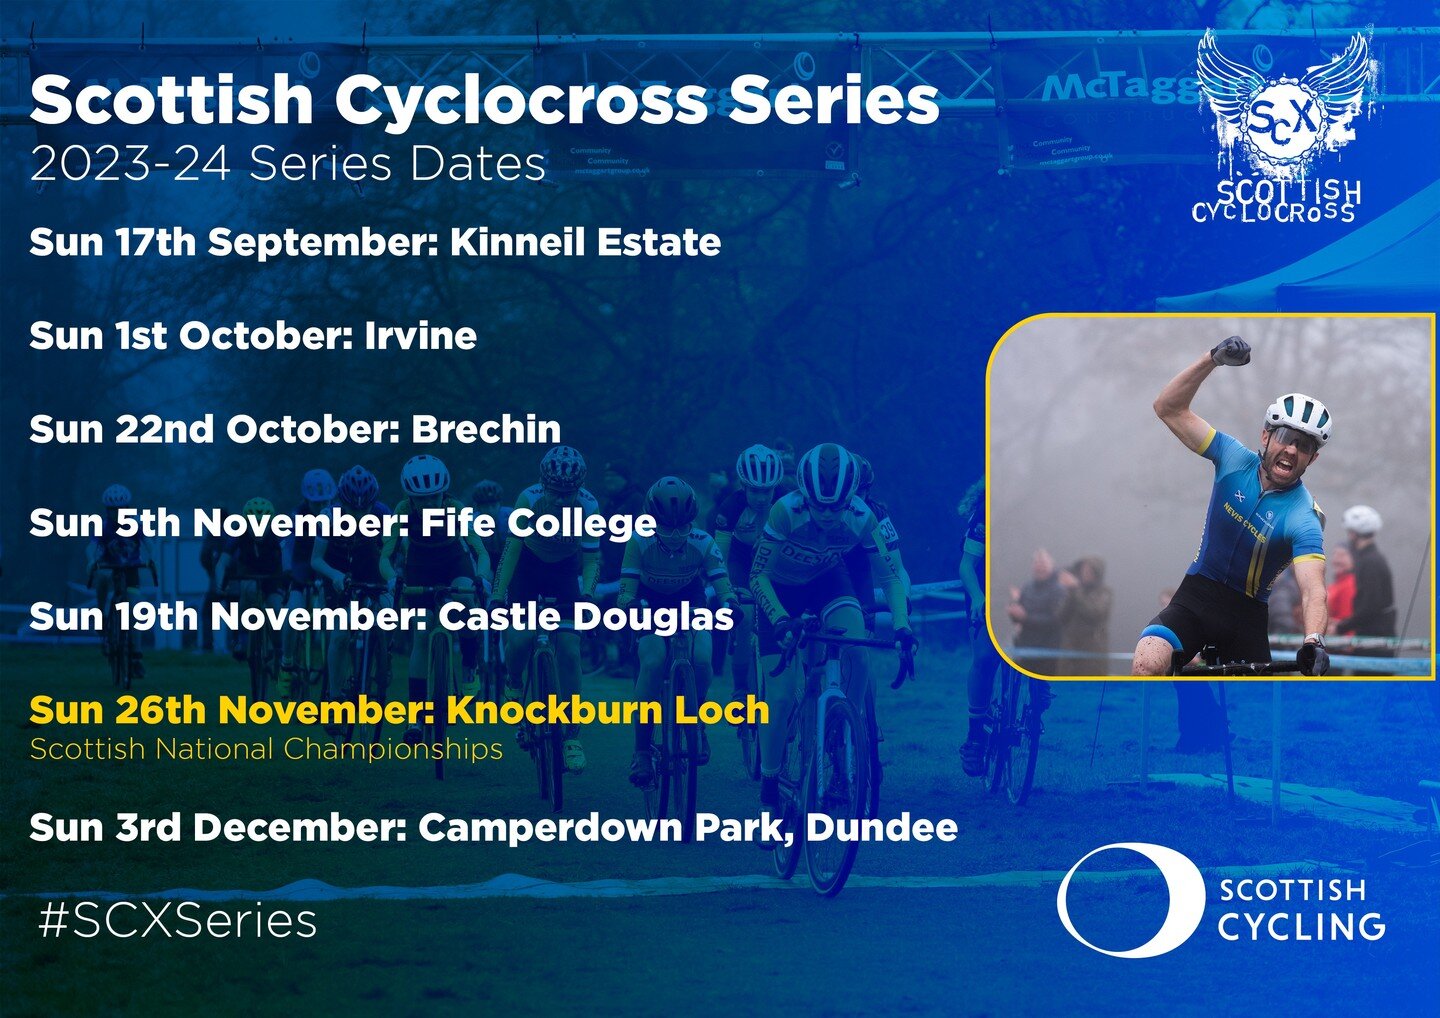 The venue for the 2023 SCX Series opener has been confirmed as Kinneil Estate. The venue made its debut in the series last year and provided a fantastic days racing. Will the pump track be included this year.... #crossiscoming #scottishcyclocross #sc